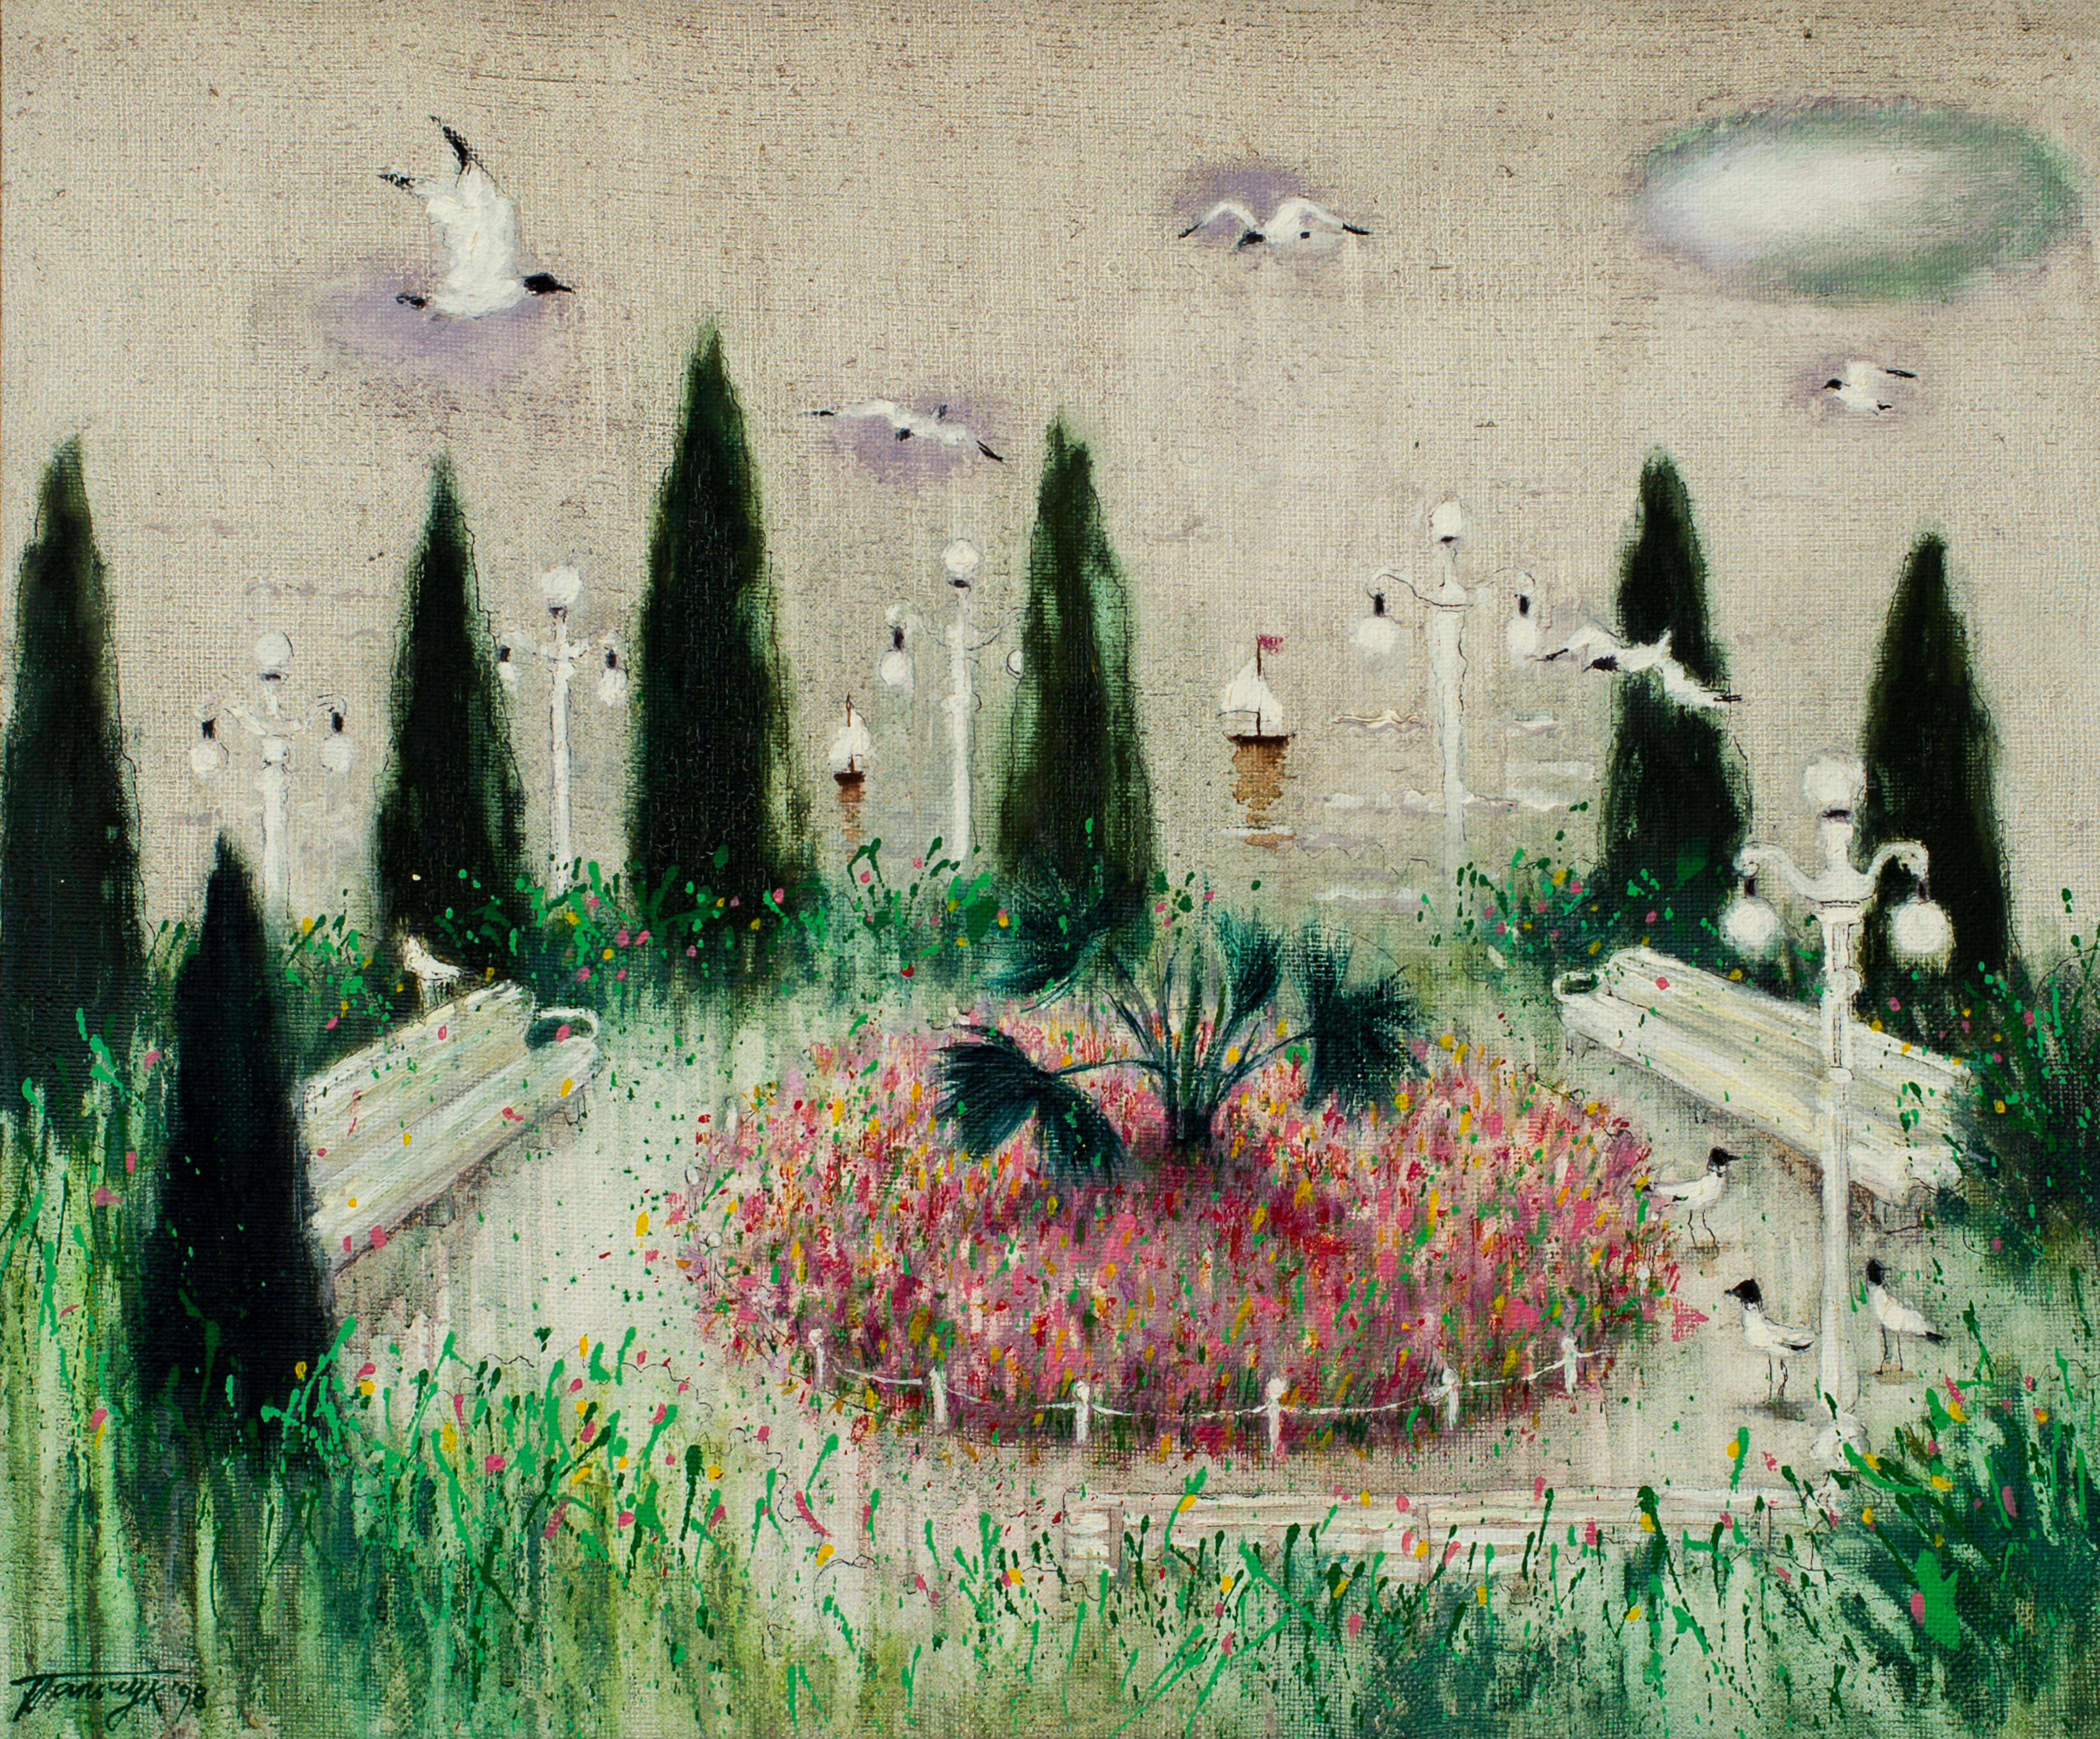 Tatyana Palchuk Landscape Painting - The Flowers Bed. 1998. Oil on linen, 50x60.5 cm